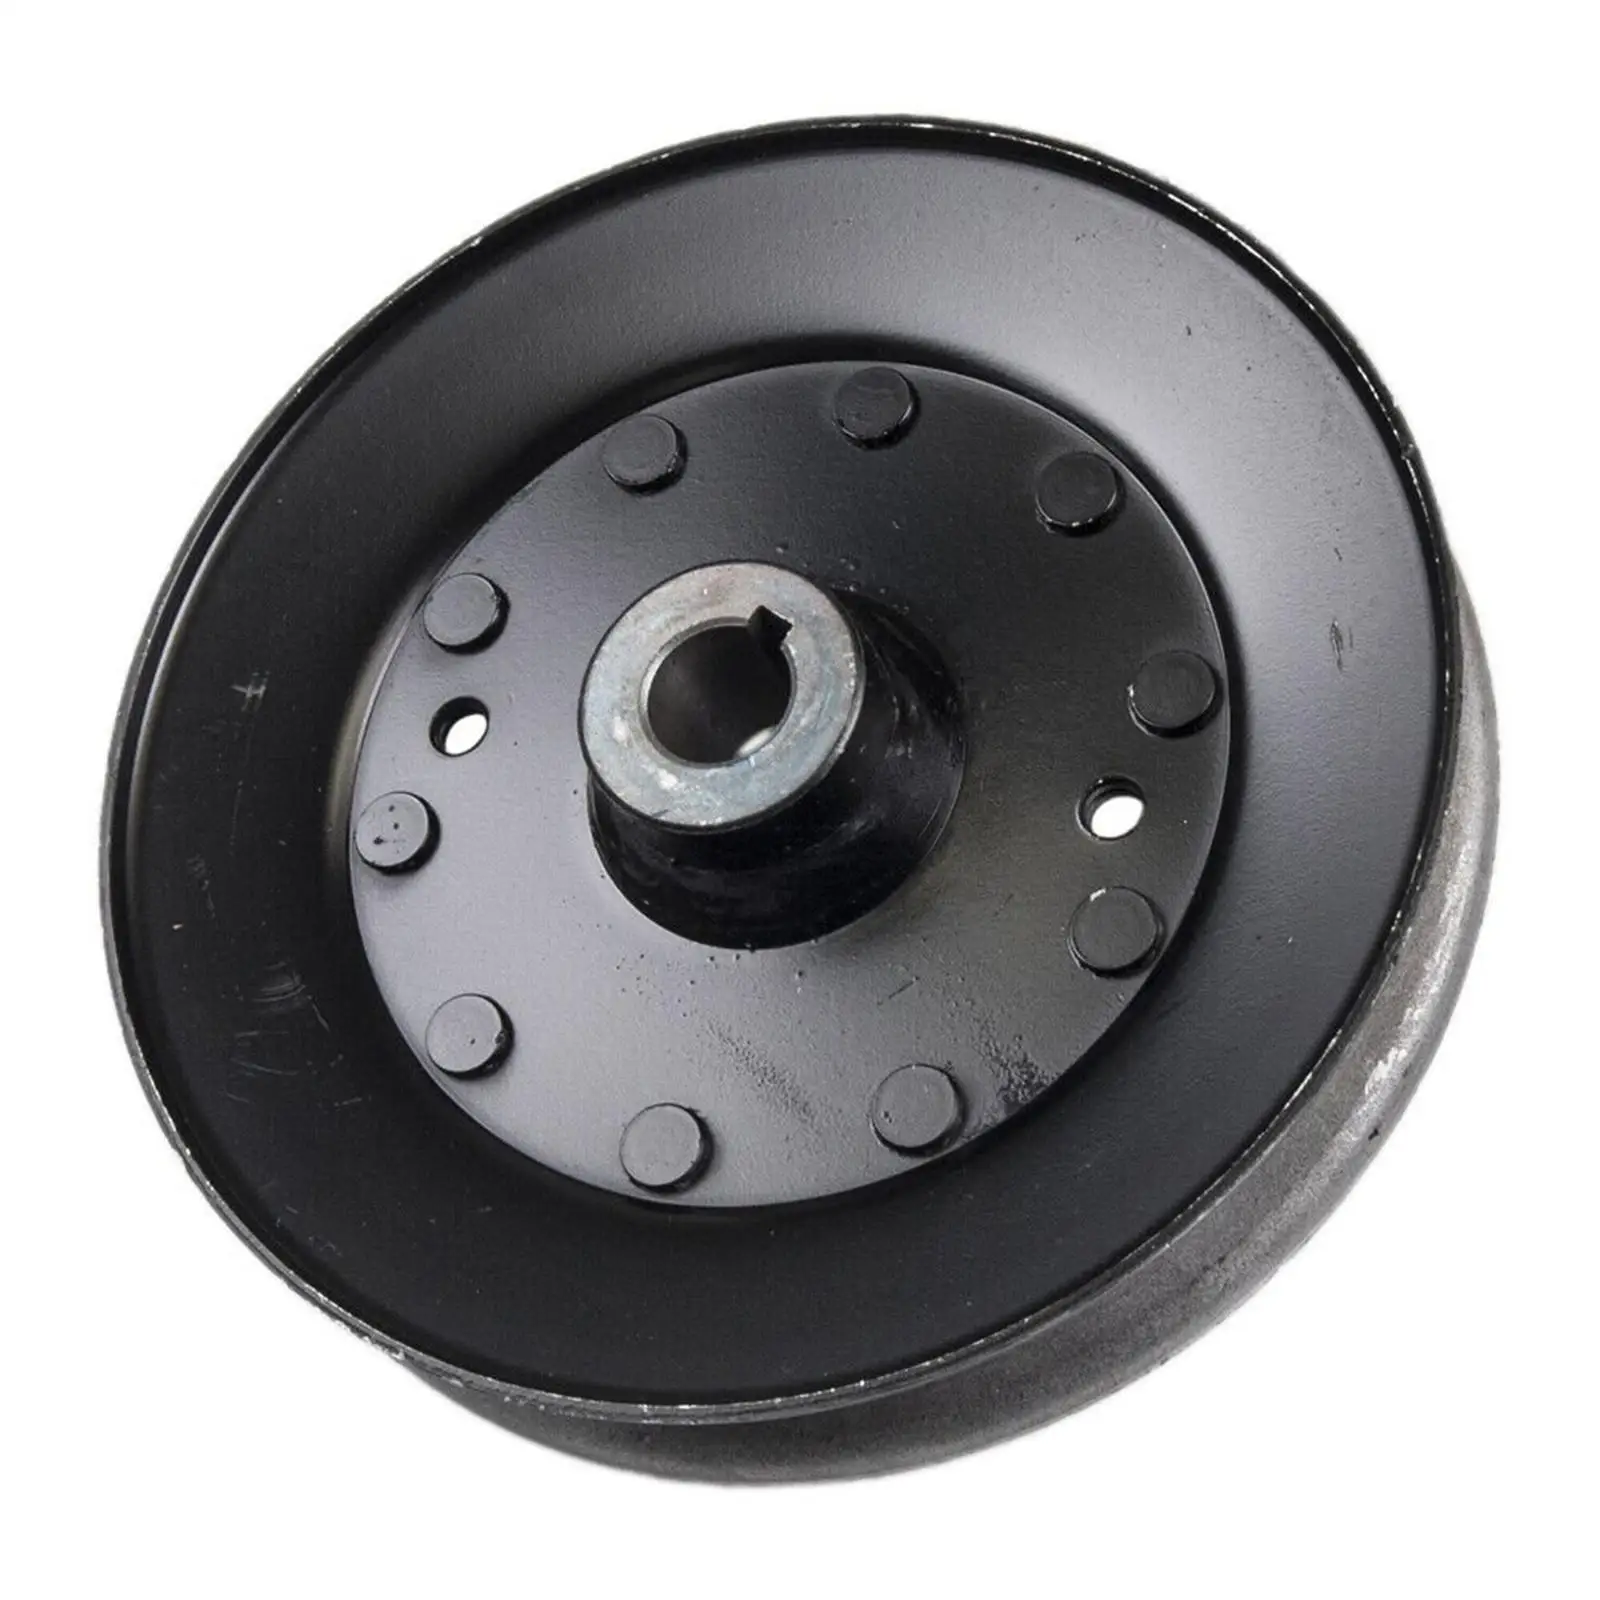 Idler Drive Pulley Accessories Metal Repair AM104405 for Lawn Tractors L1742 L100 D100 Fine Surface Processing Easy to Install